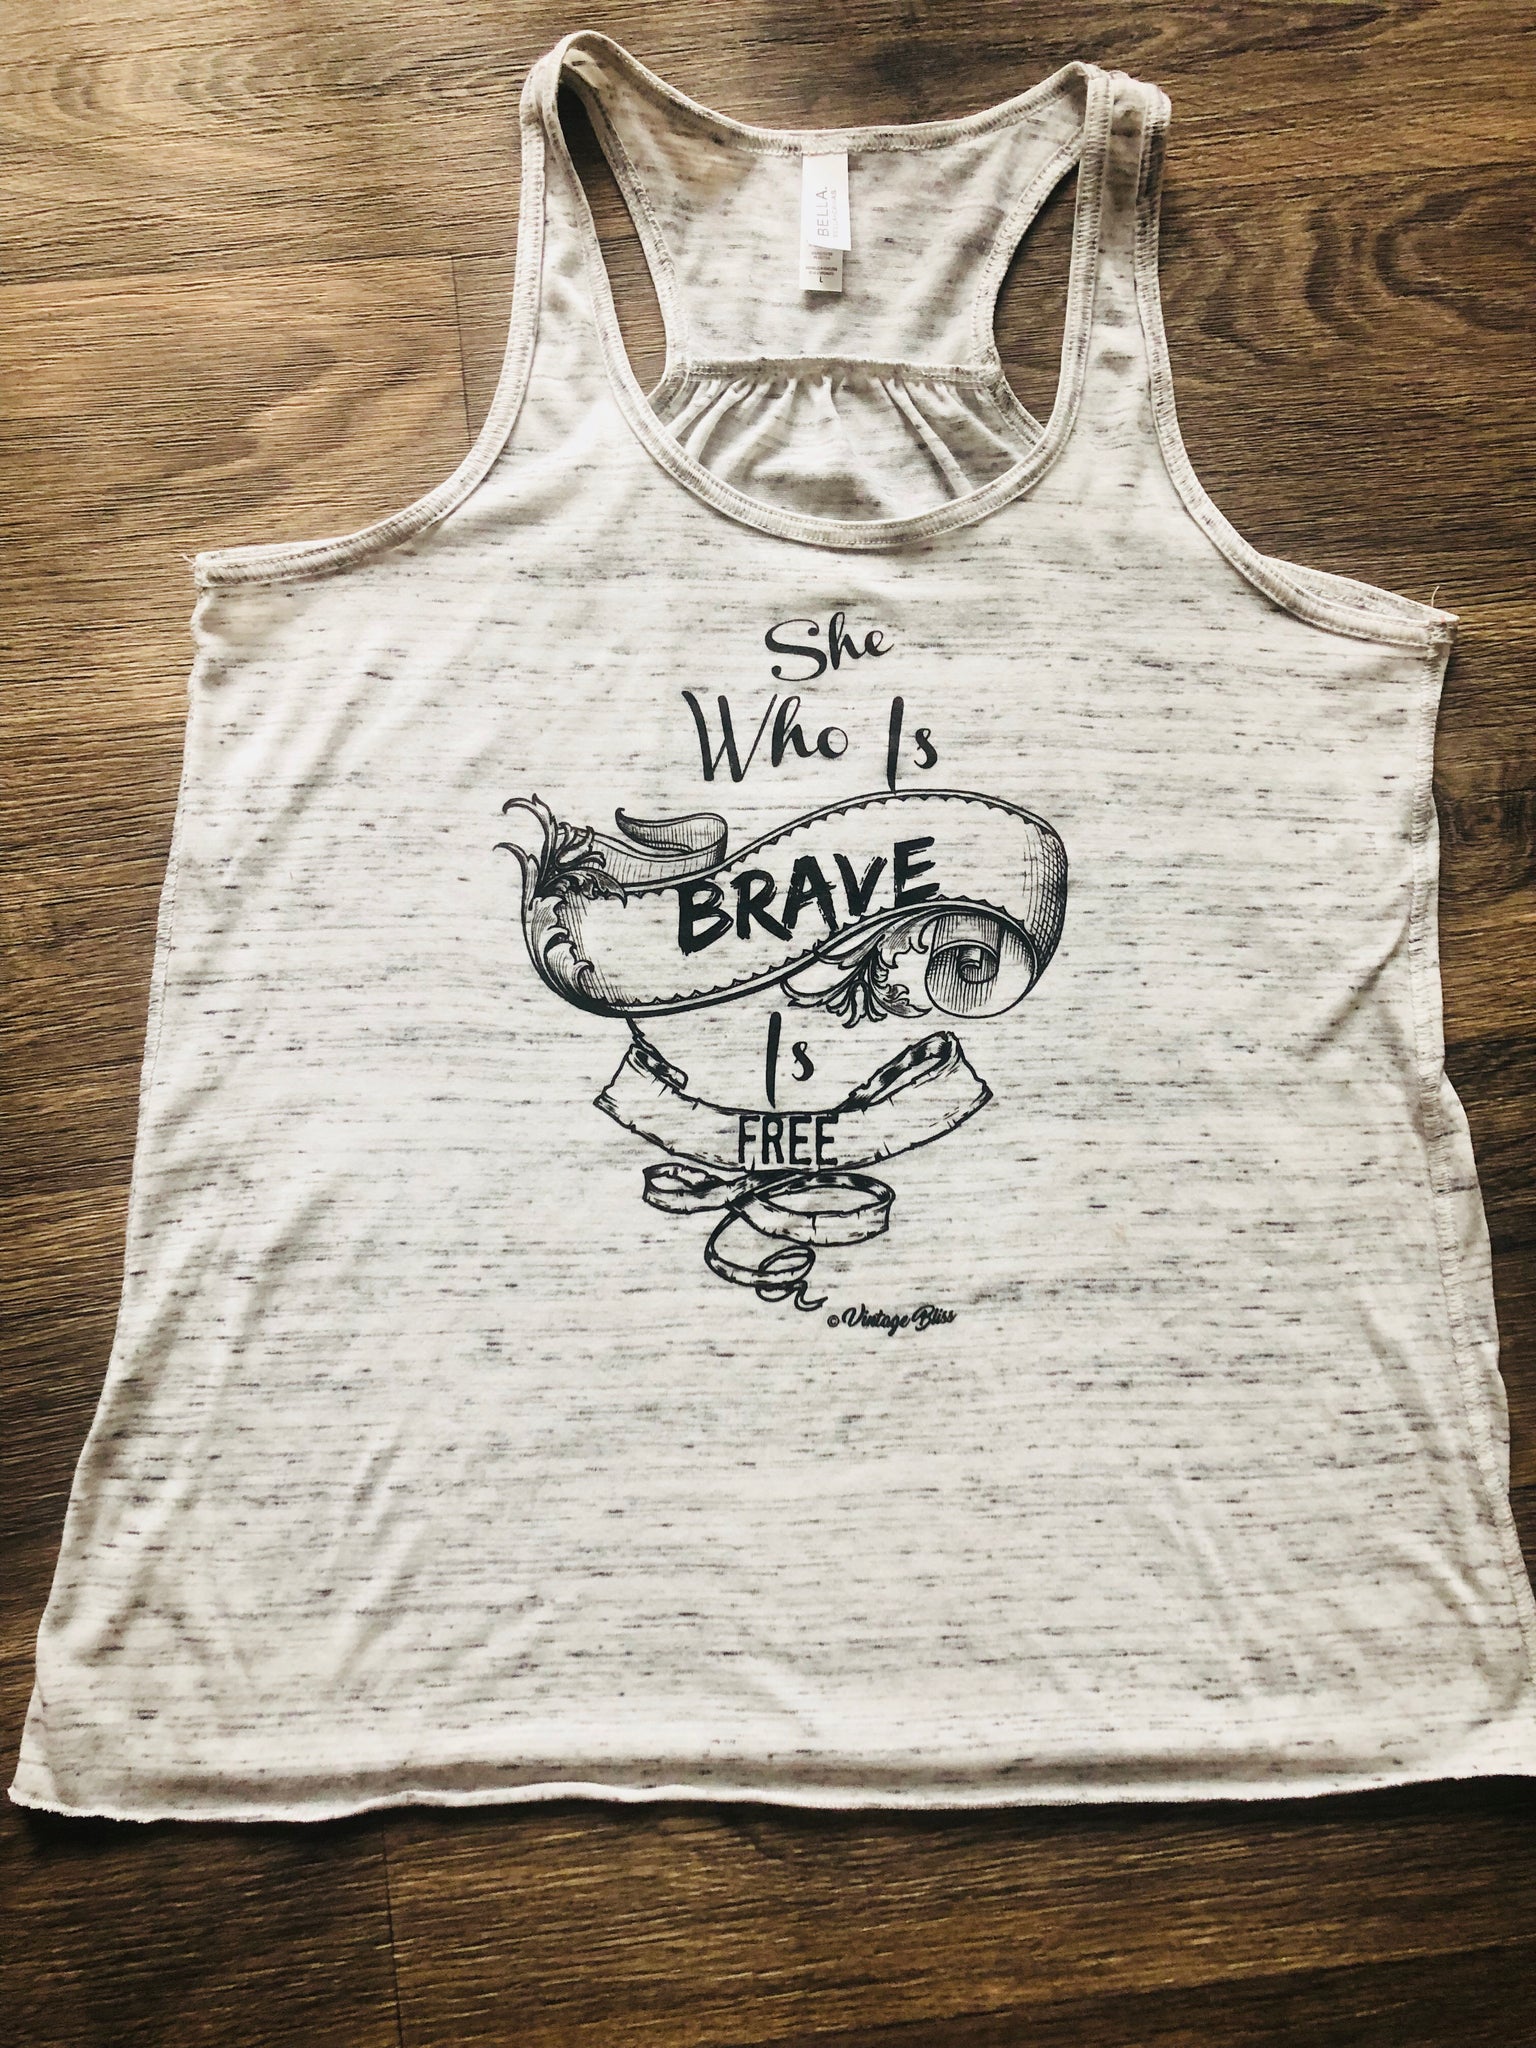 She Who Is Brave is Free Racerback Tank